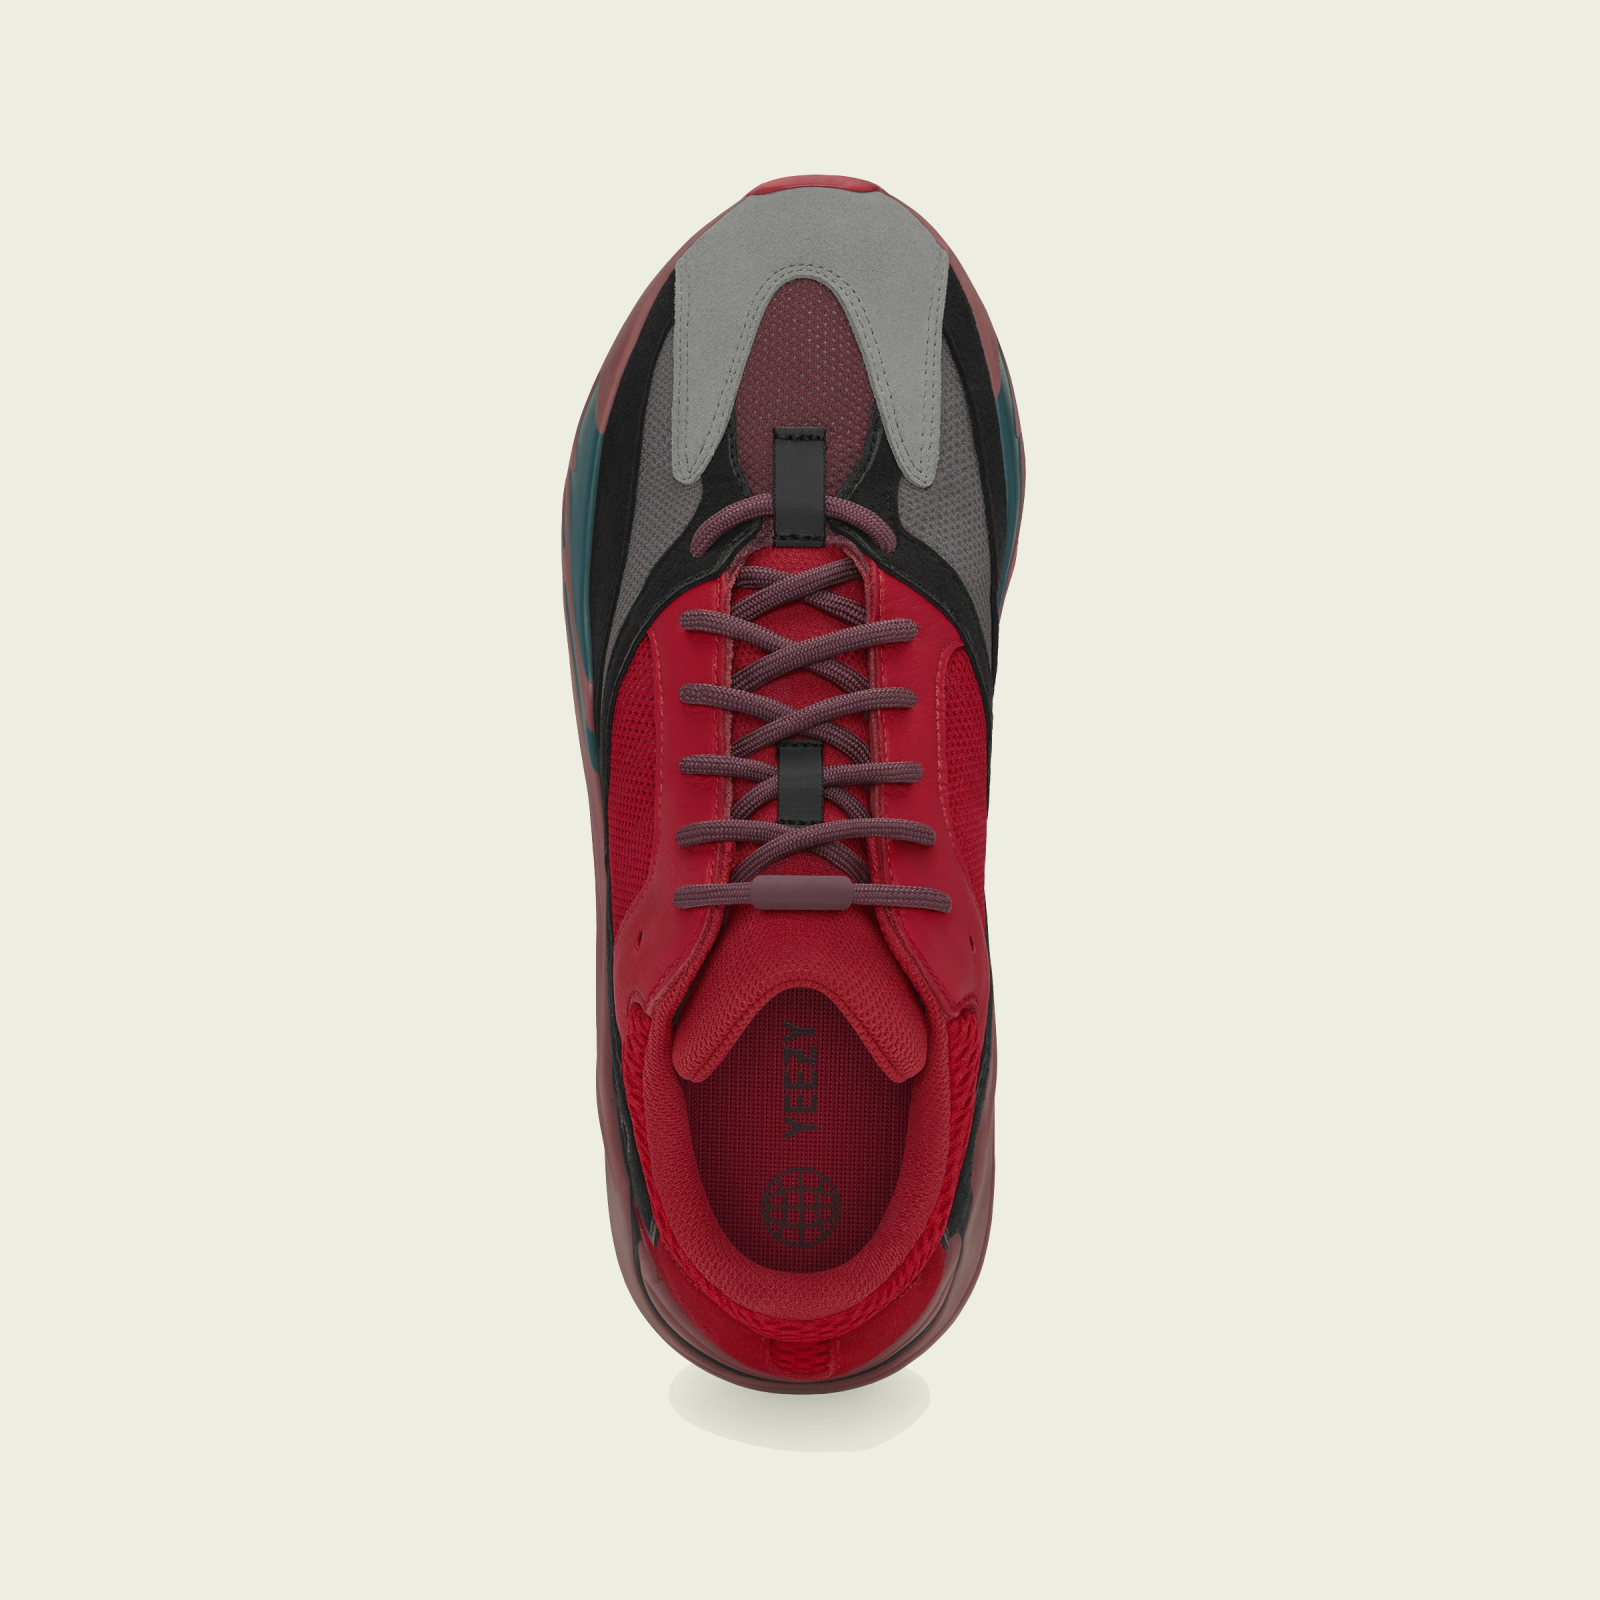 Adidas Yeezy Boost 700
« Hi-Res Red »